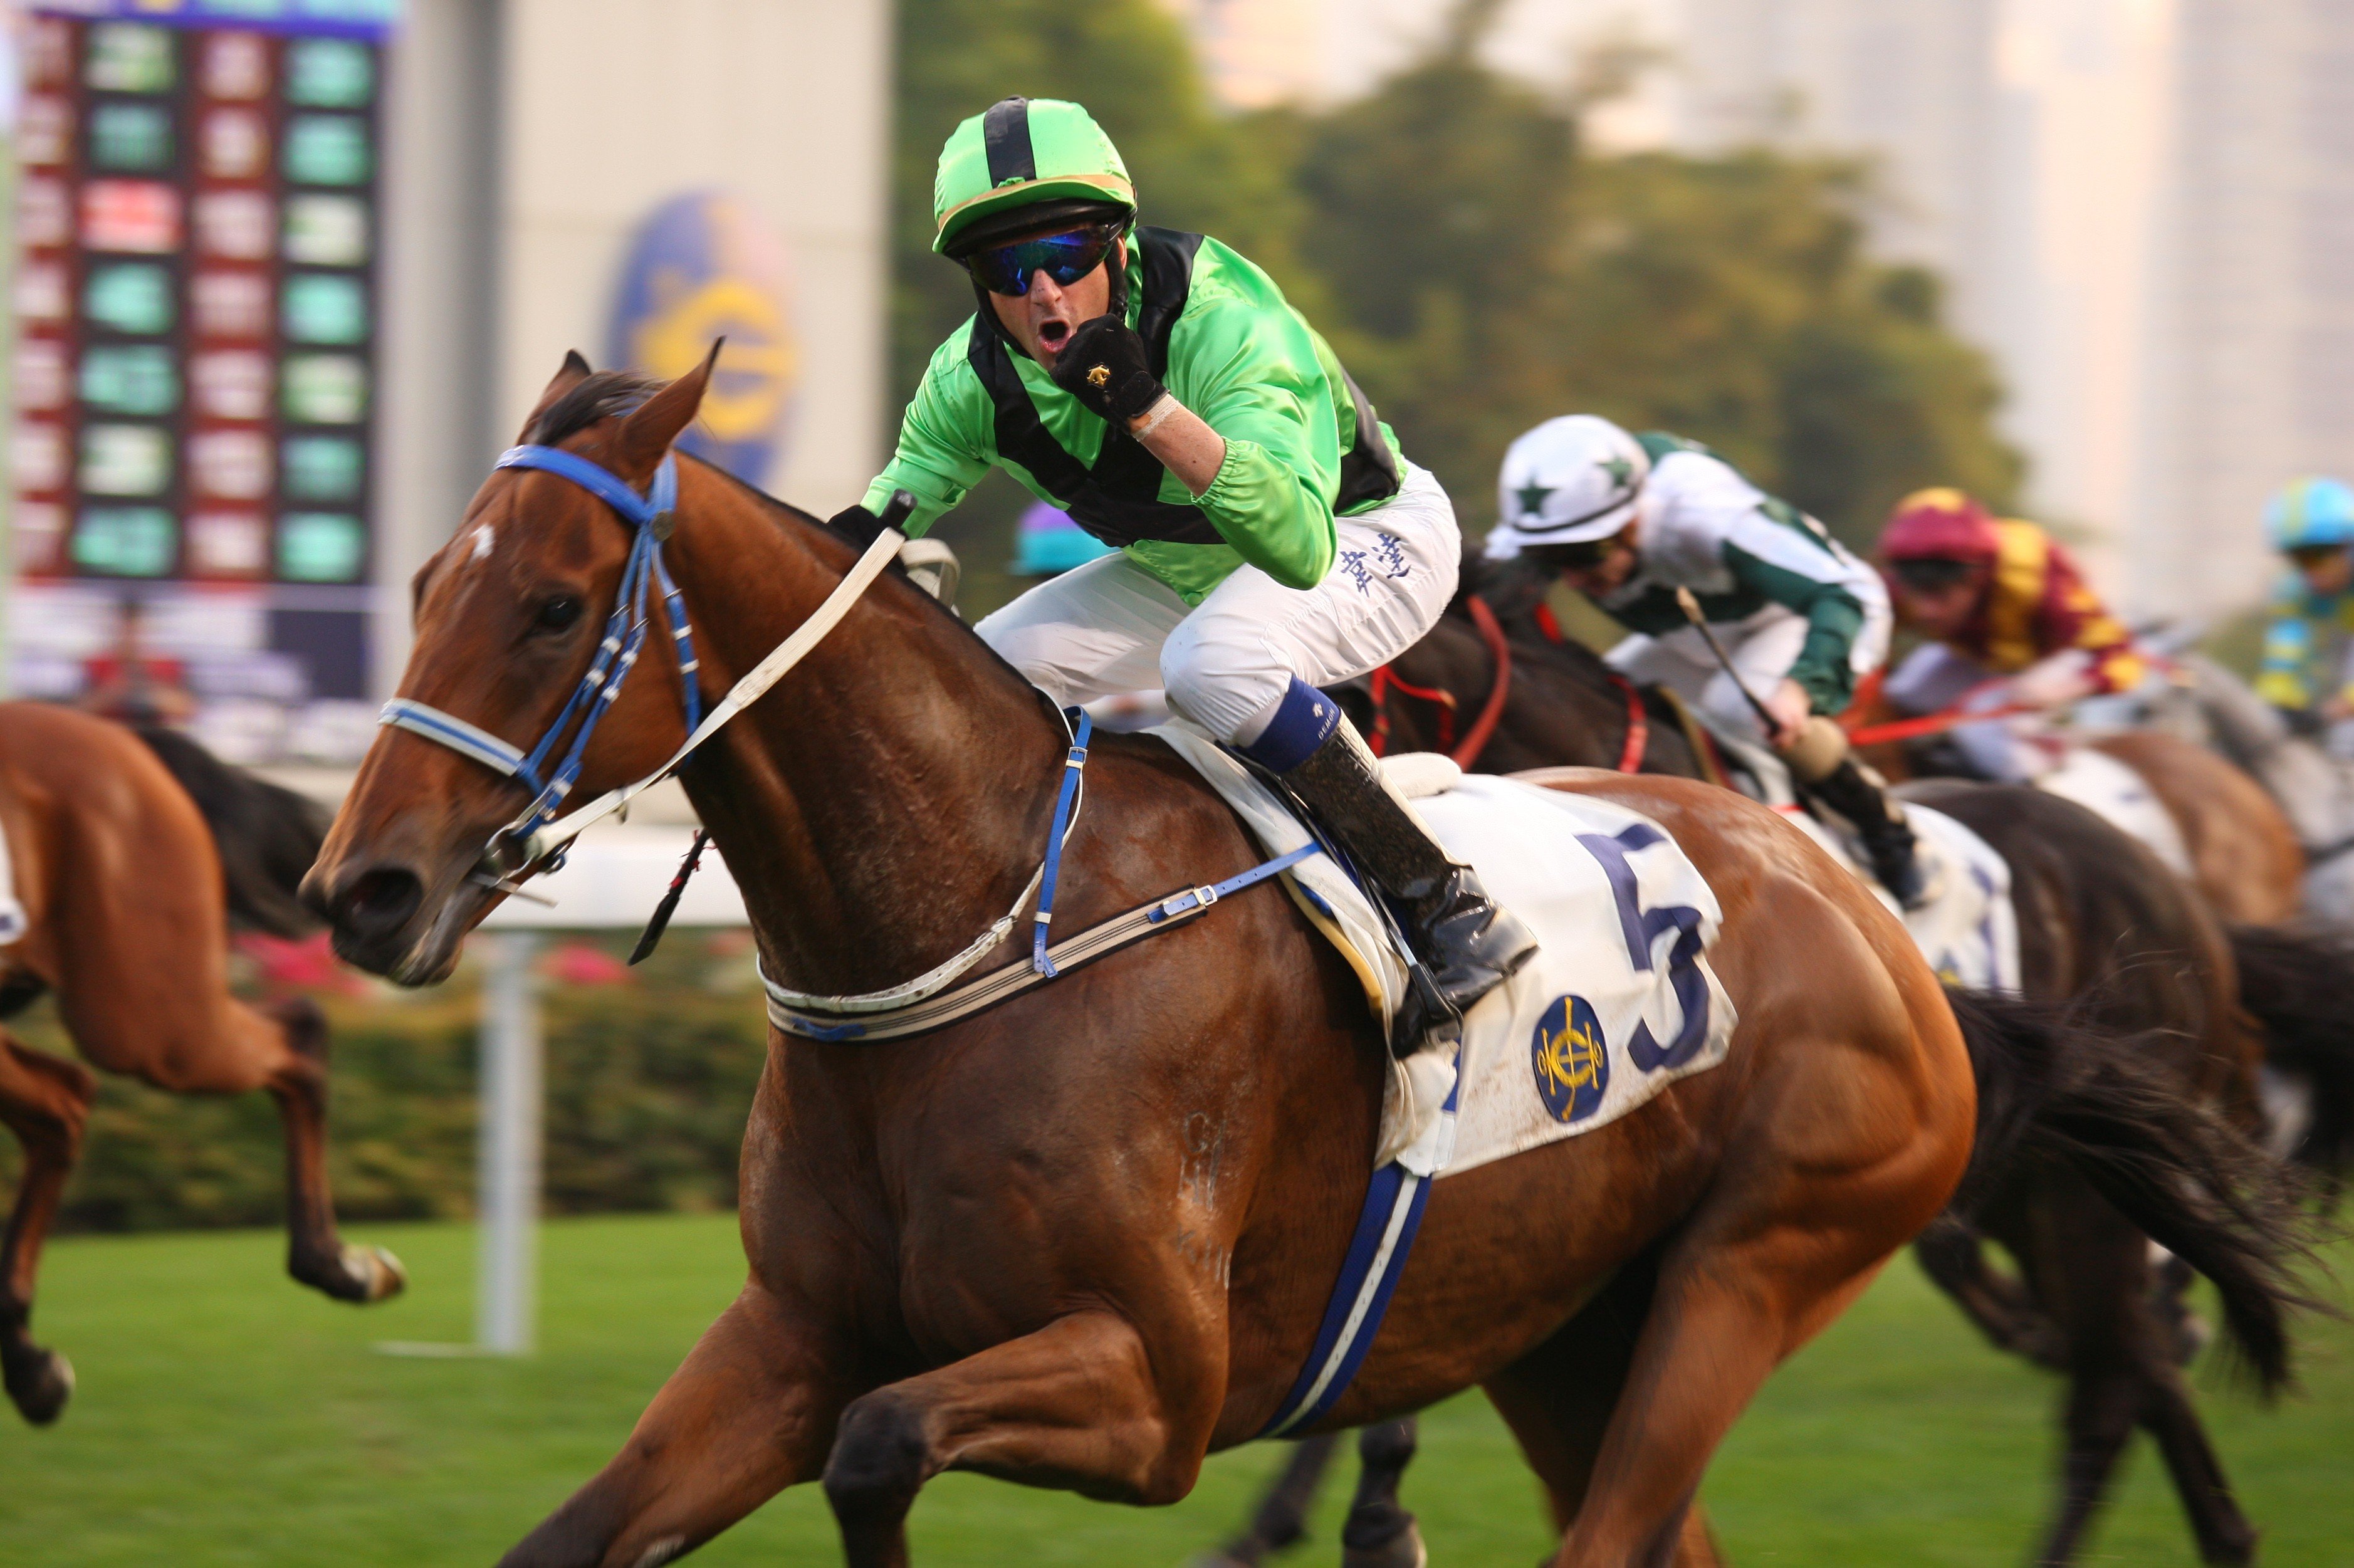 Super Satin, ridden by Douglas Whyte, won the Peninsula Golden Jubilee Challenge Cup at Sha Tin in 2010.